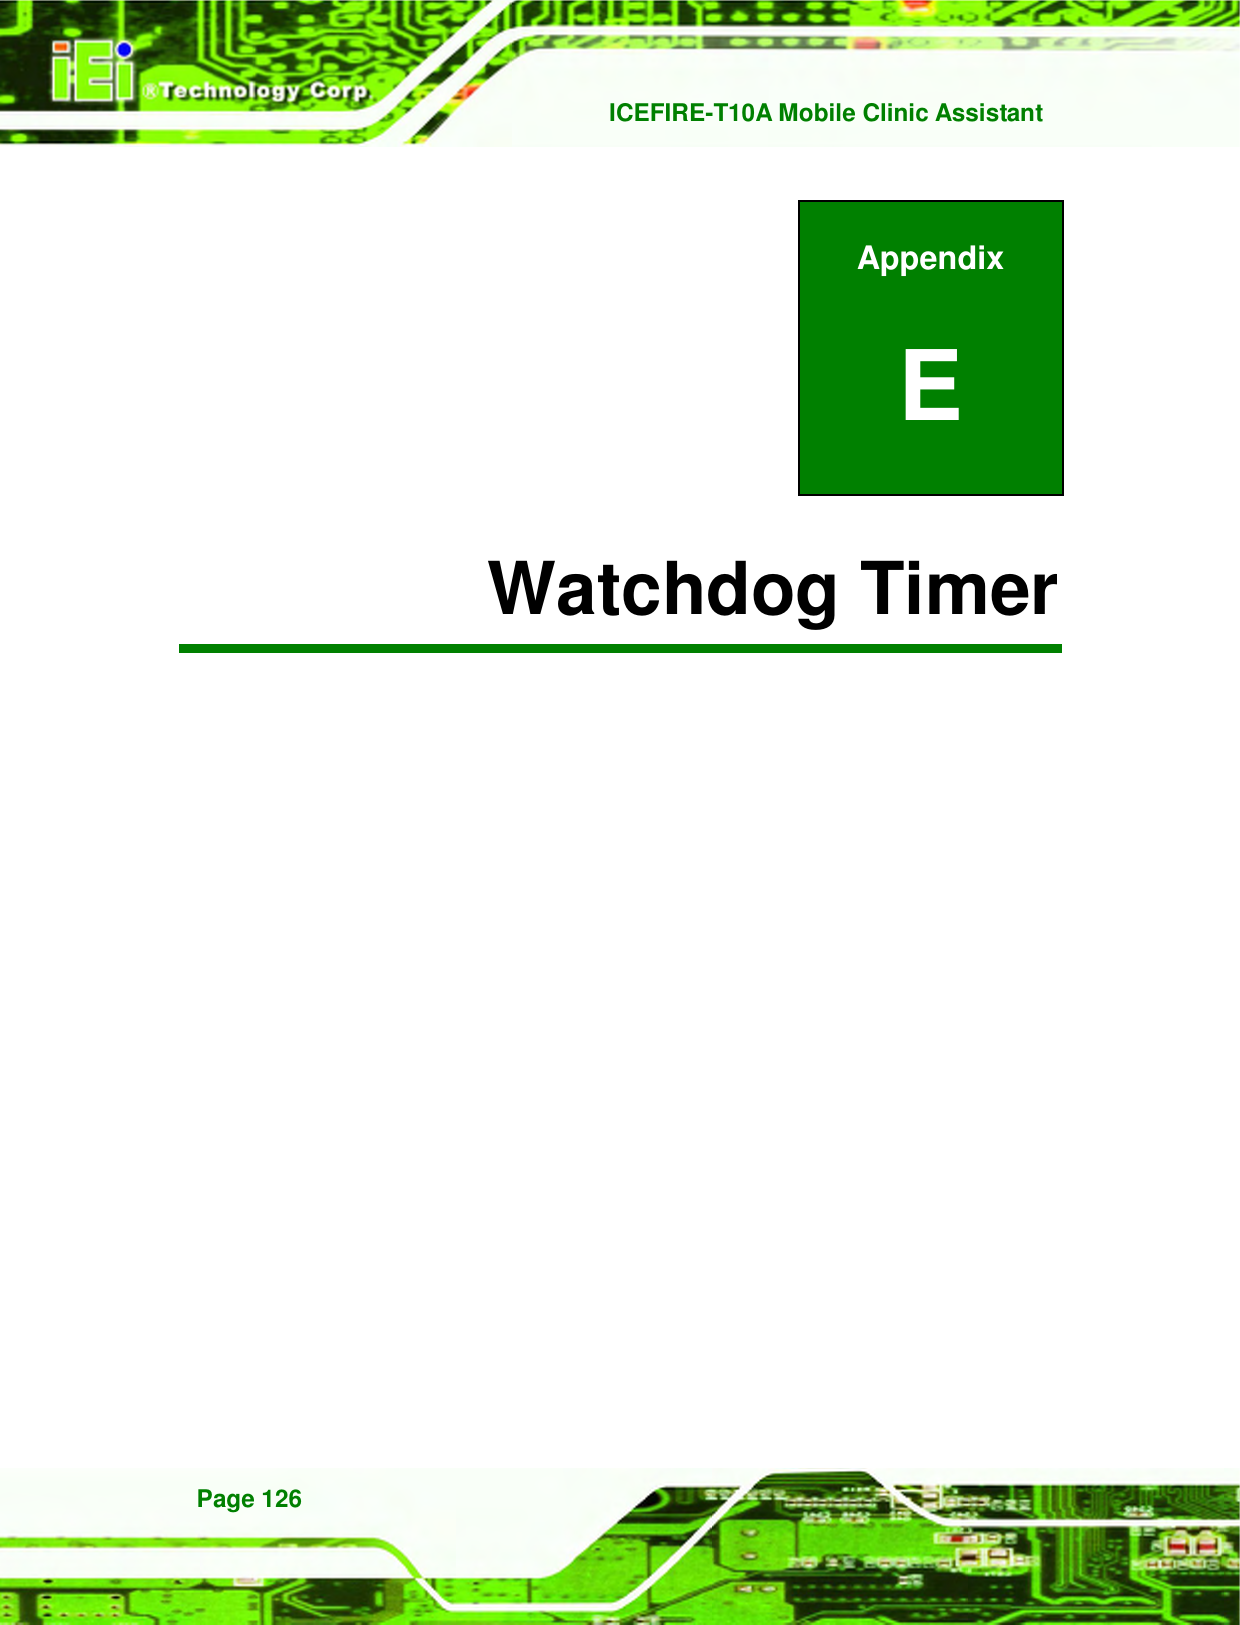   ICEFIRE-T10A Mobile Clinic Assistant Page 126 Appendix E E Watchdog Timer 